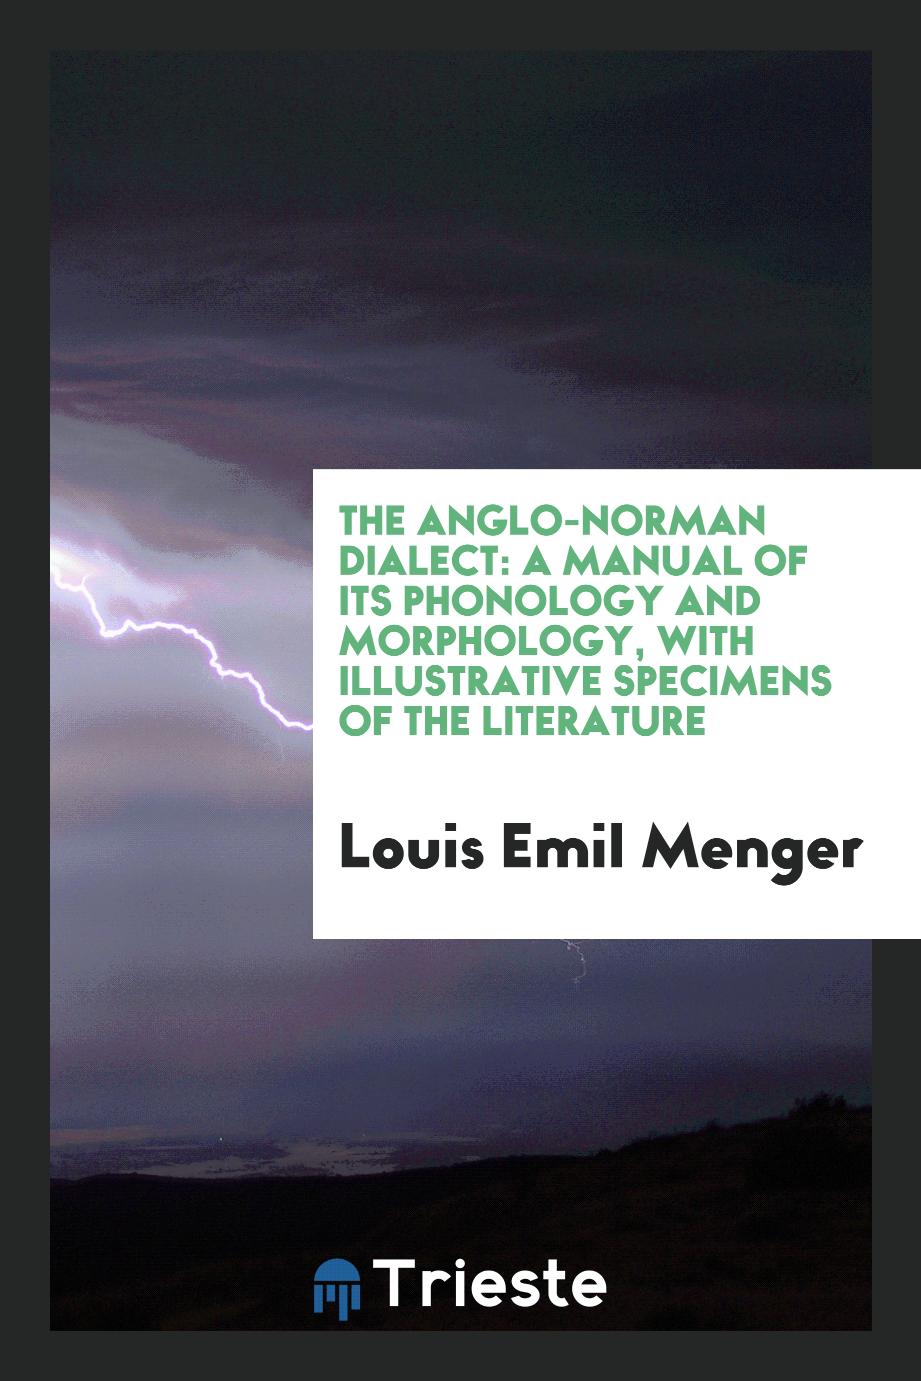 The Anglo-Norman dialect: a manual of its phonology and morphology, with illustrative specimens of the literature